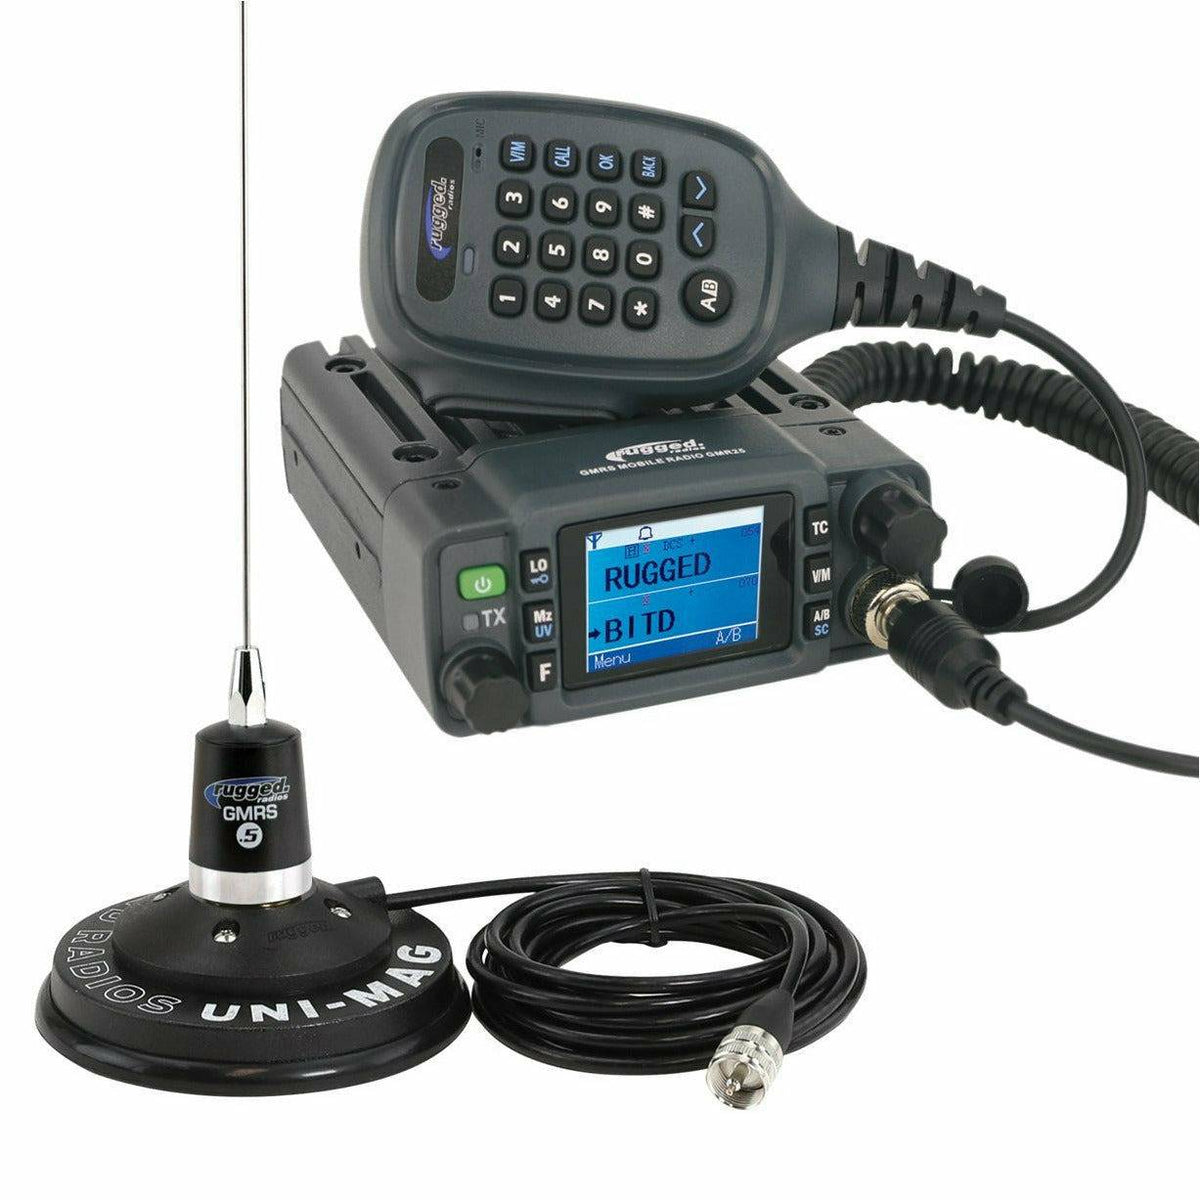 GMR25 Waterproof GMRS Band Mobile Radio with Antenna